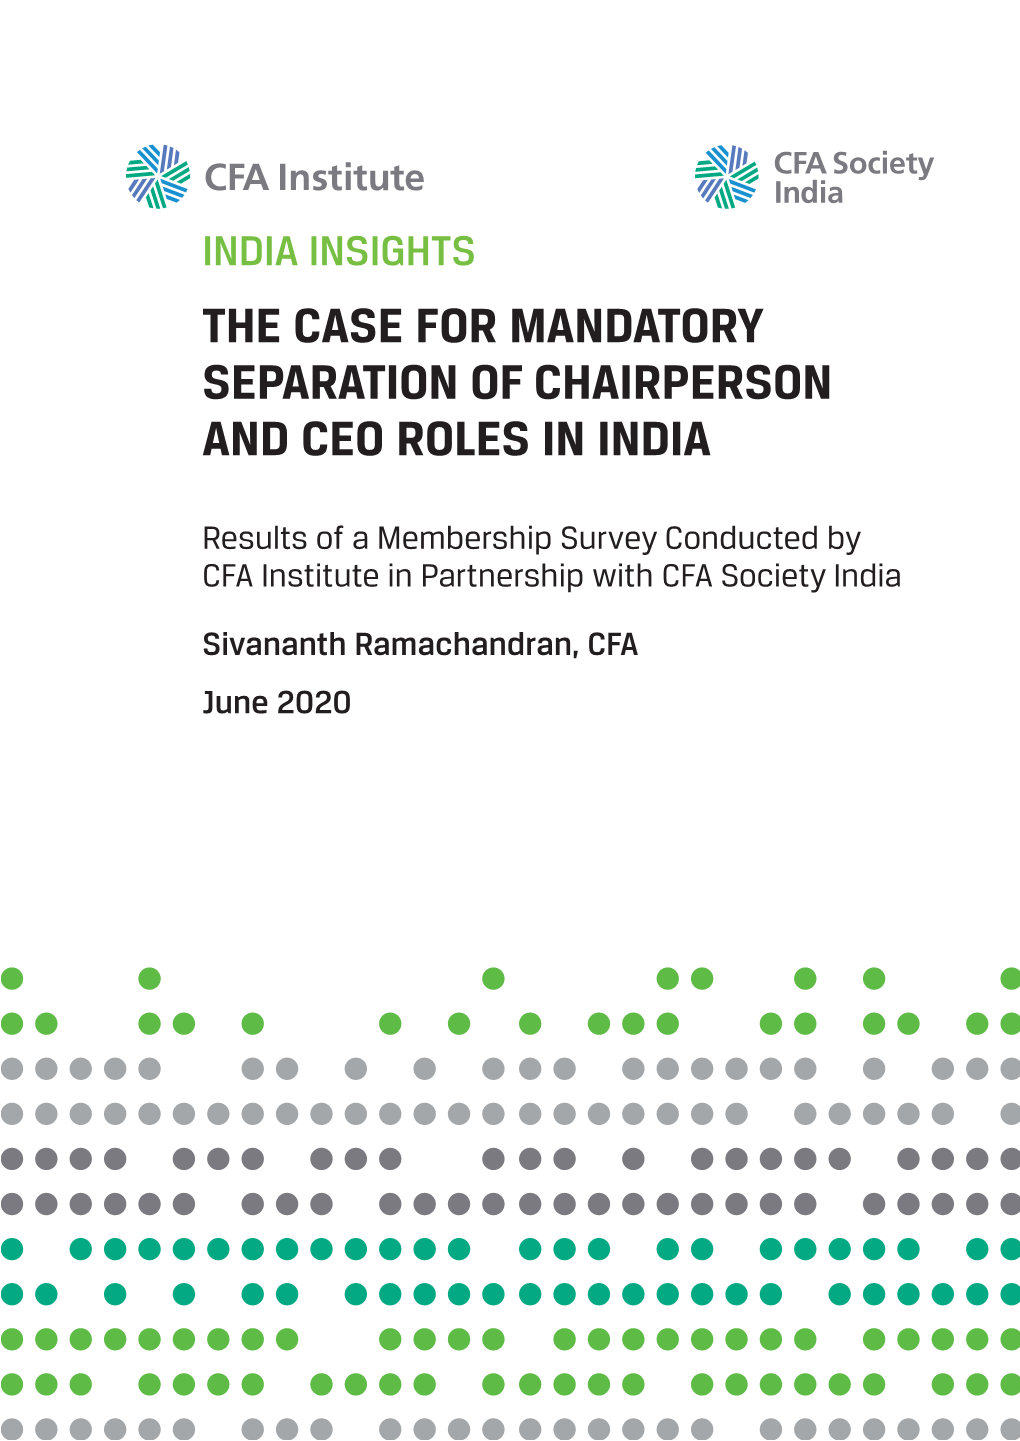 The Case for Mandatory Separation of Chairperson and Ceo Roles in India